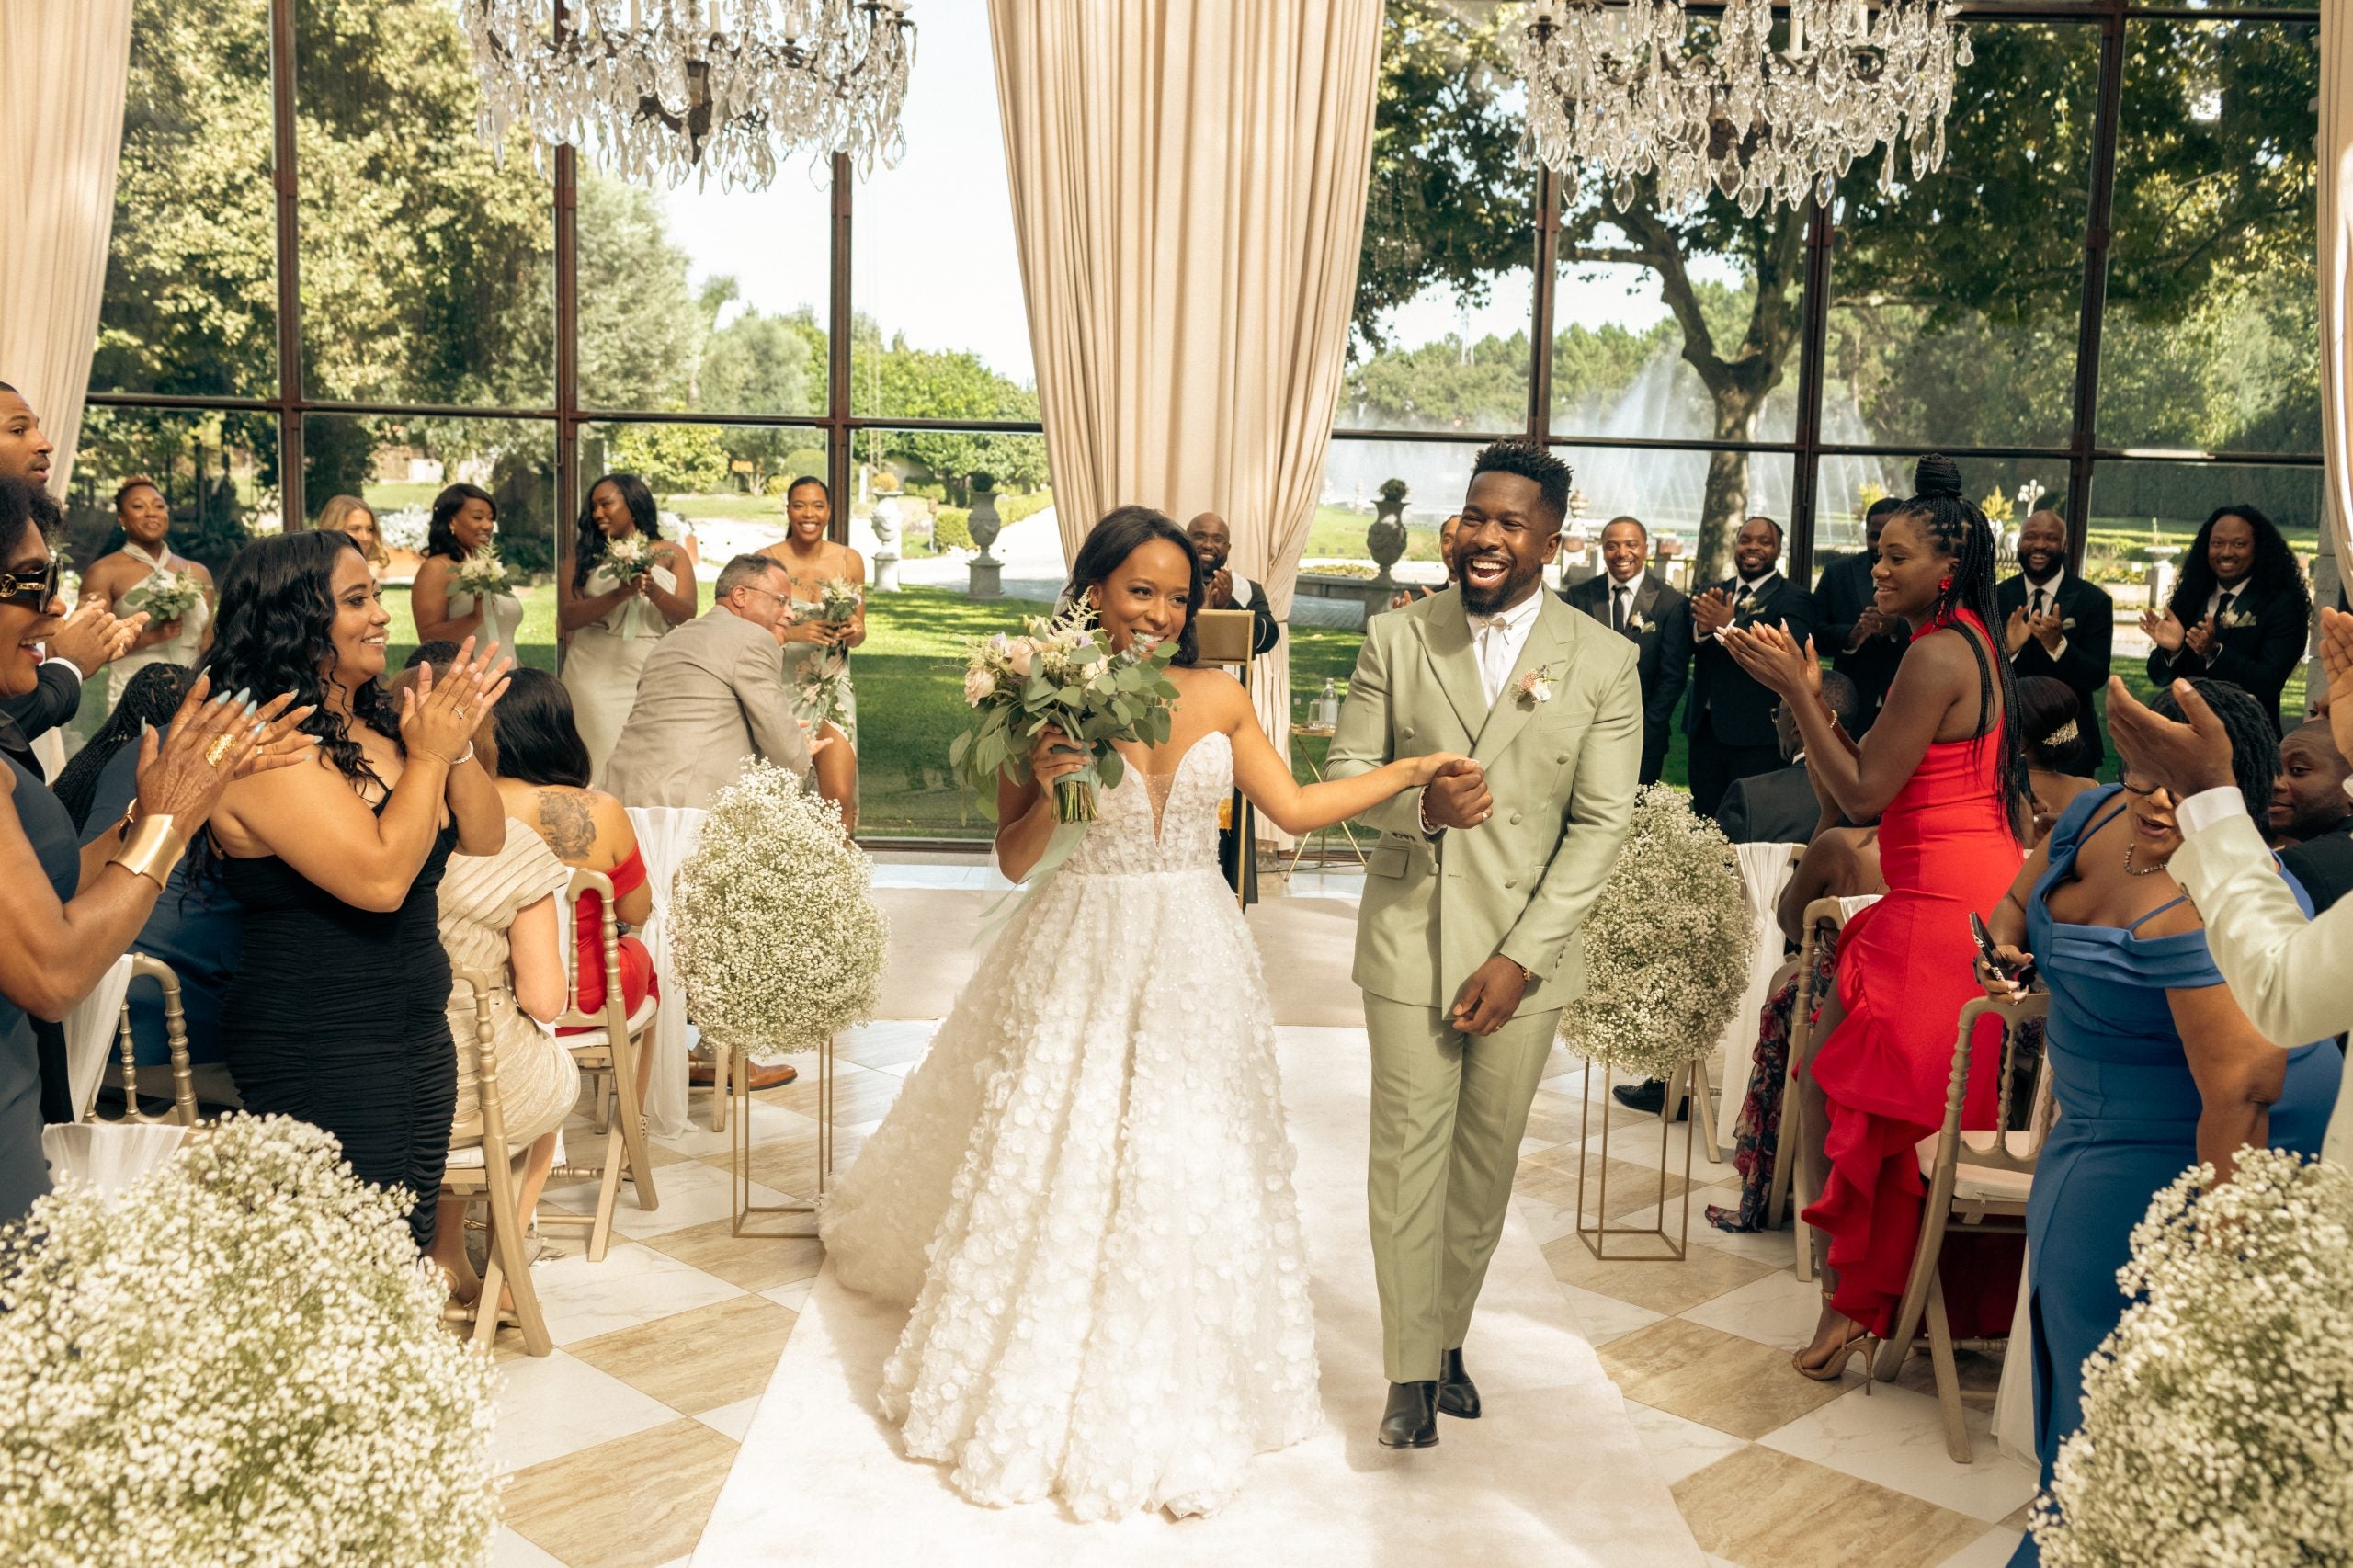 Bridal Bliss: Actor Jean Elie And Randall Bailey Celebrated Their Love With A Party In Portugal